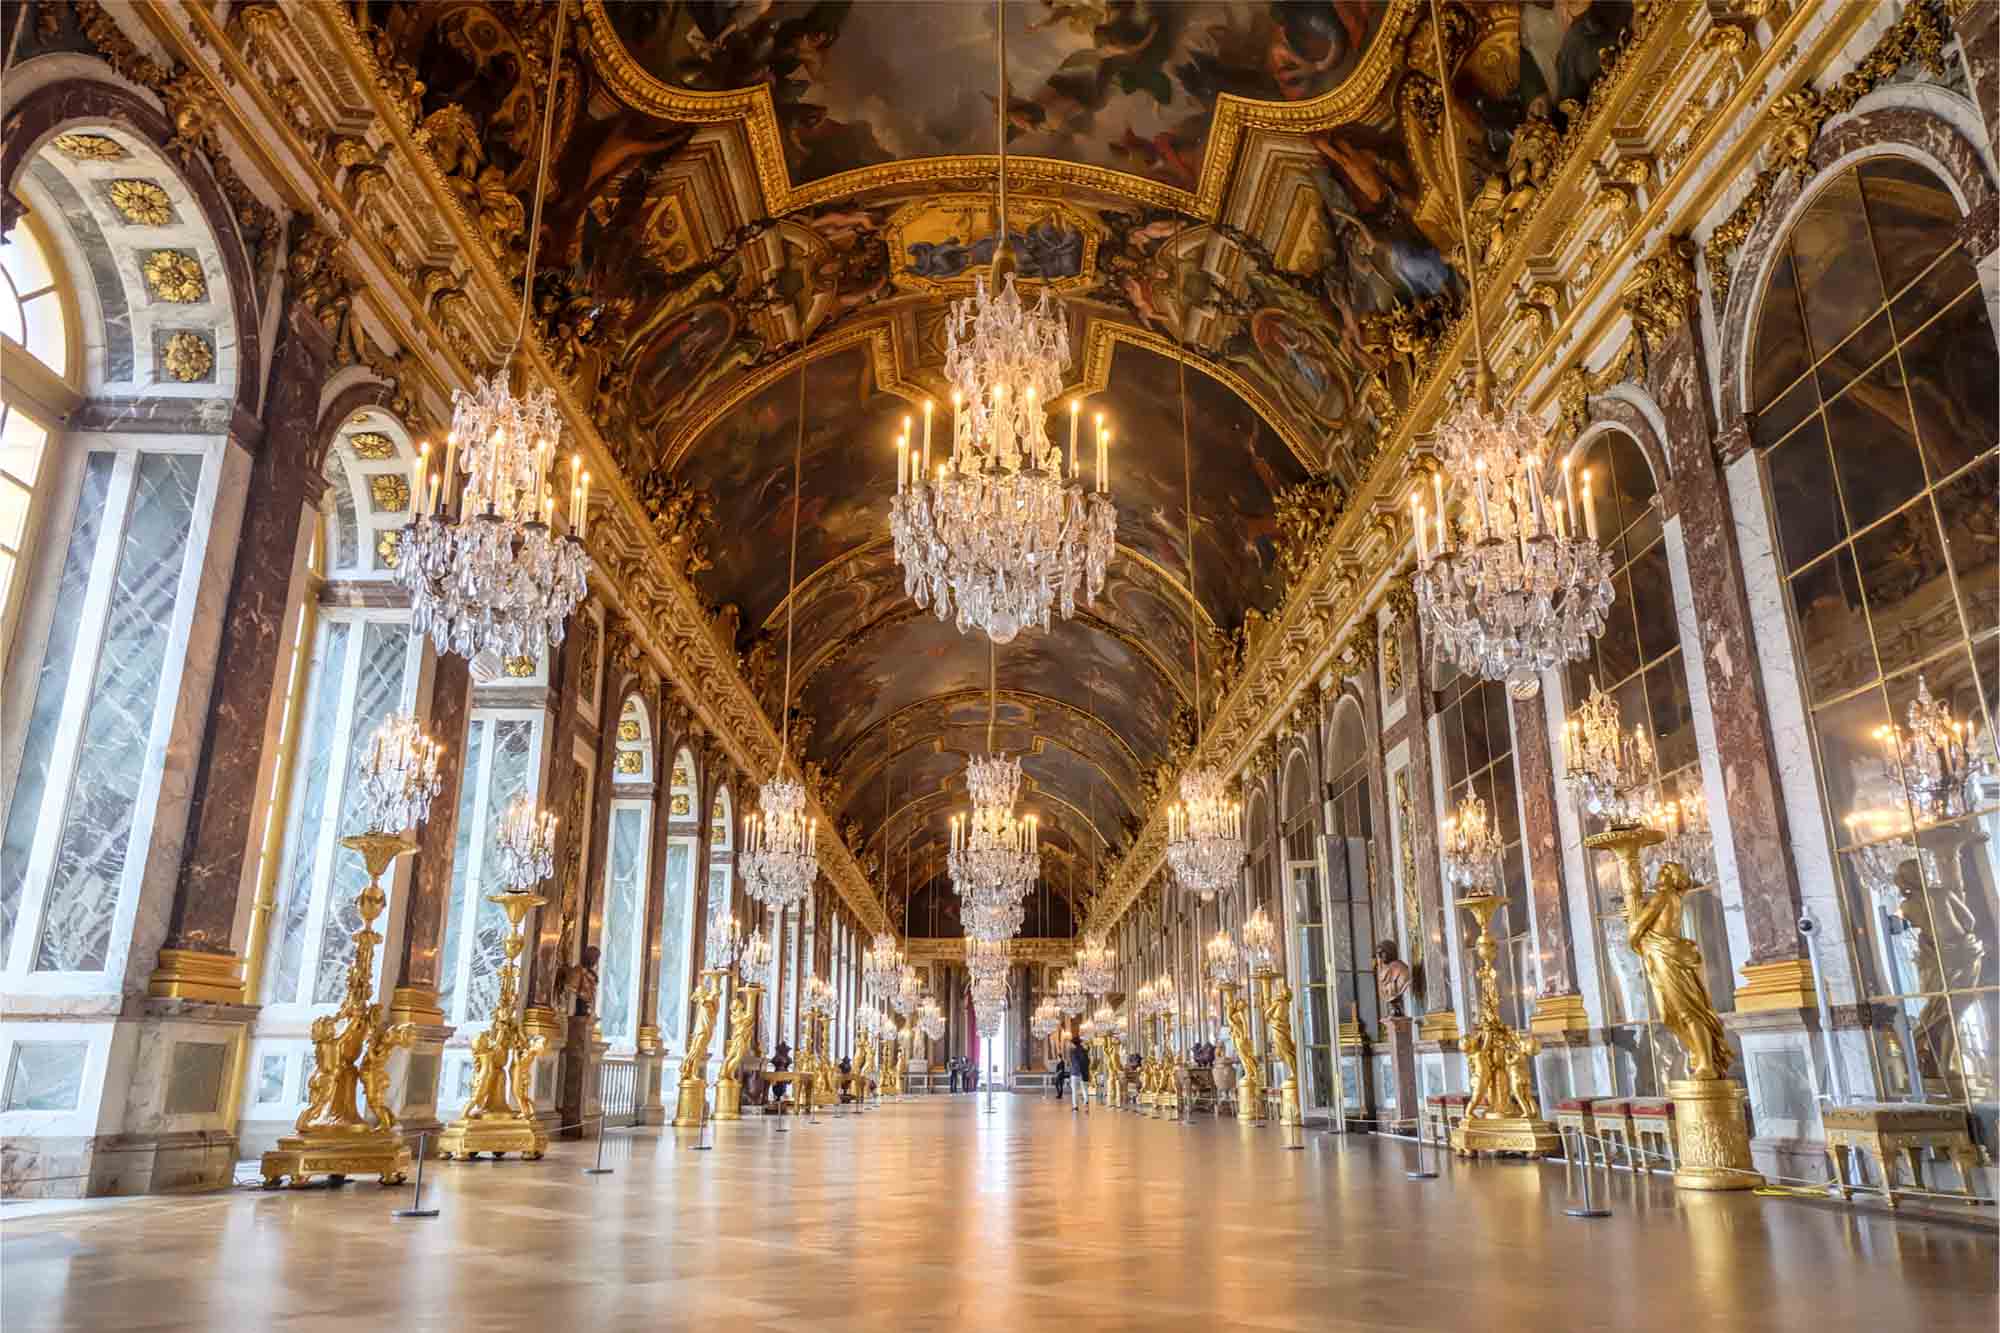 The ornate Hall of Mirrors in Versailles